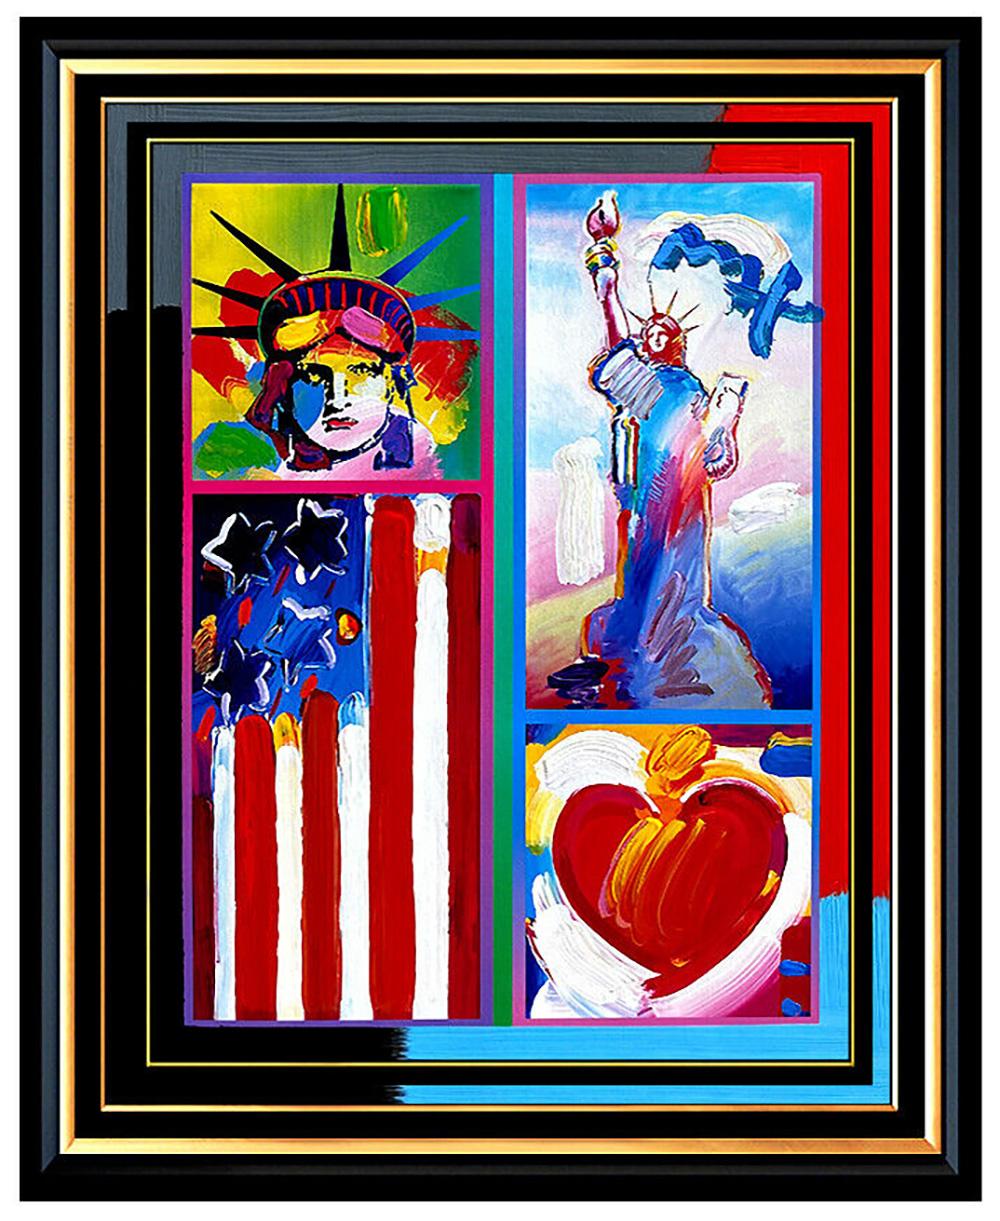 Peter Max Figurative Painting - PETER MAX original signed PAINTING Statue of LIBERTY HEAD Art FLAG with HEART 